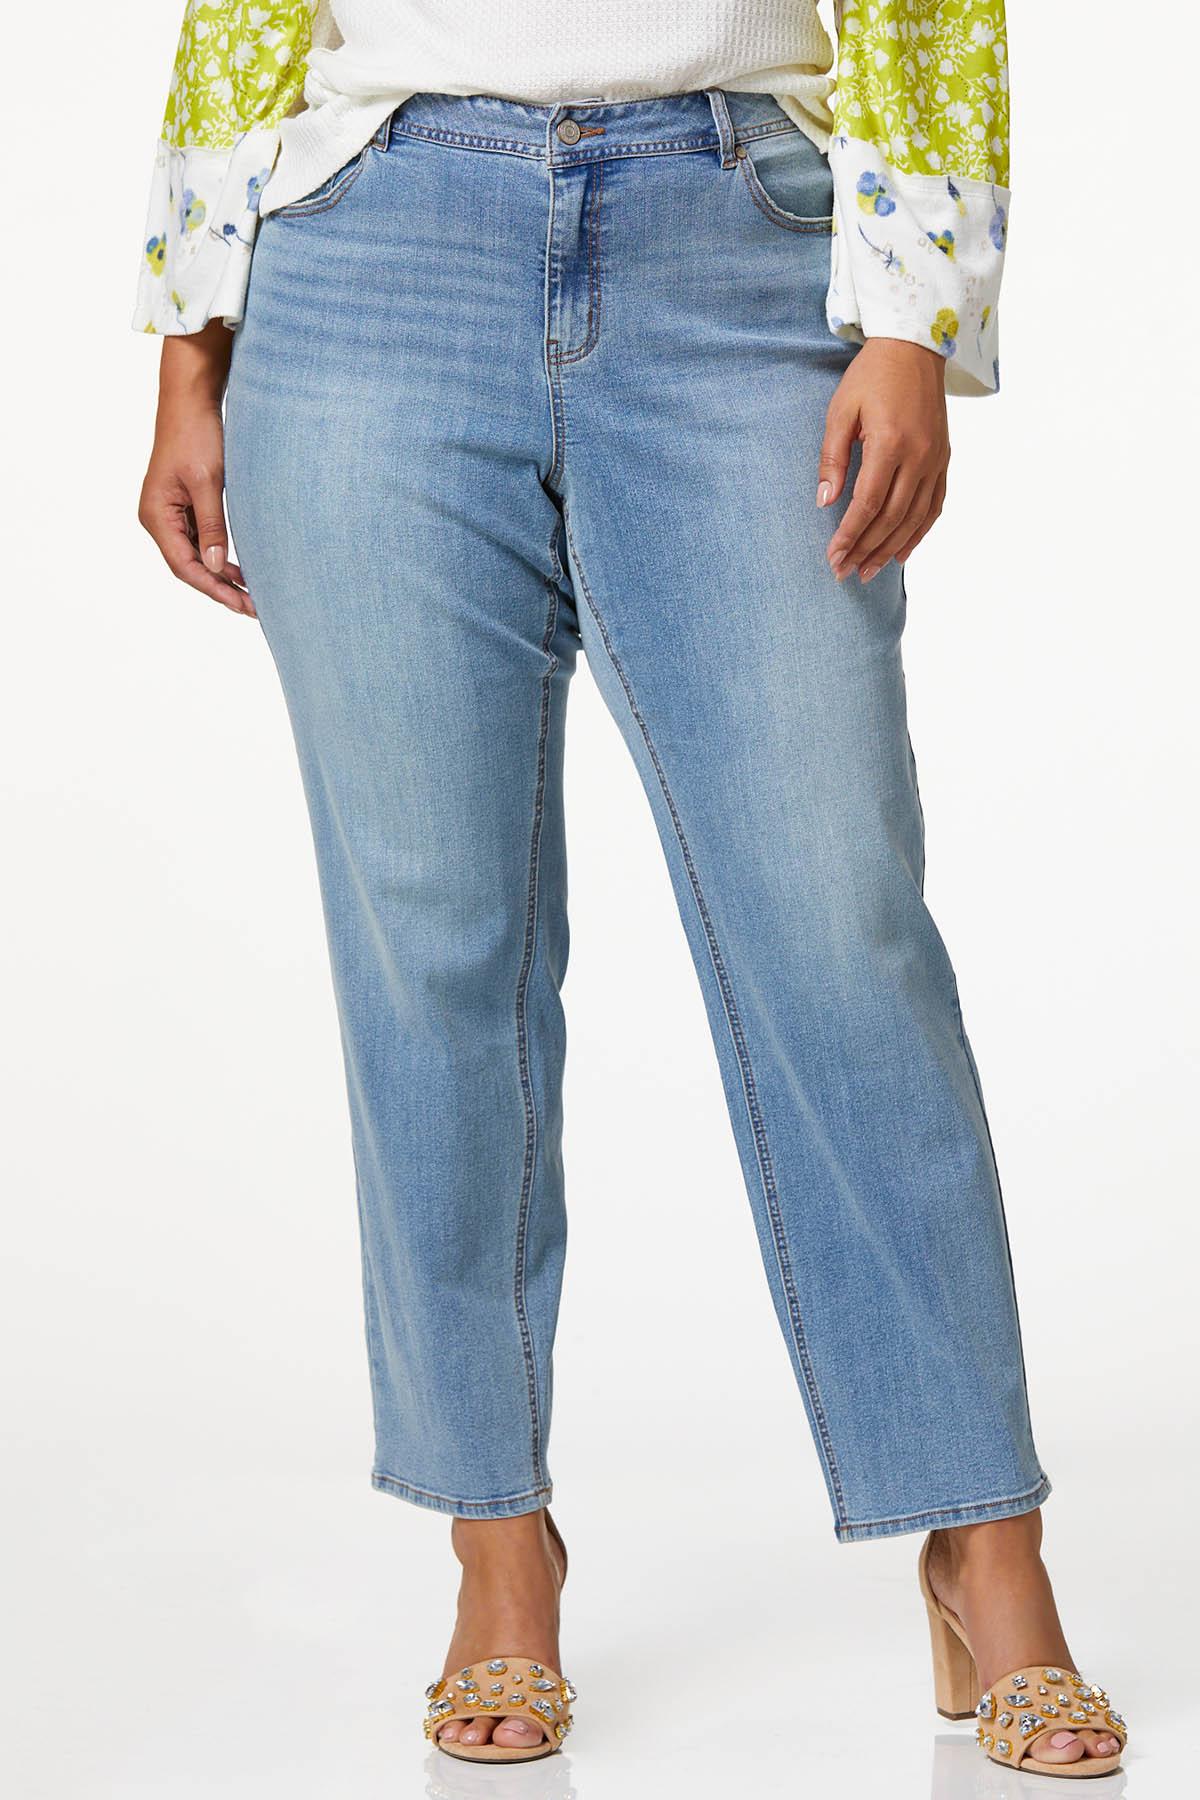 Cato Fashions  Cato Plus Size High Rise Straight Jeans